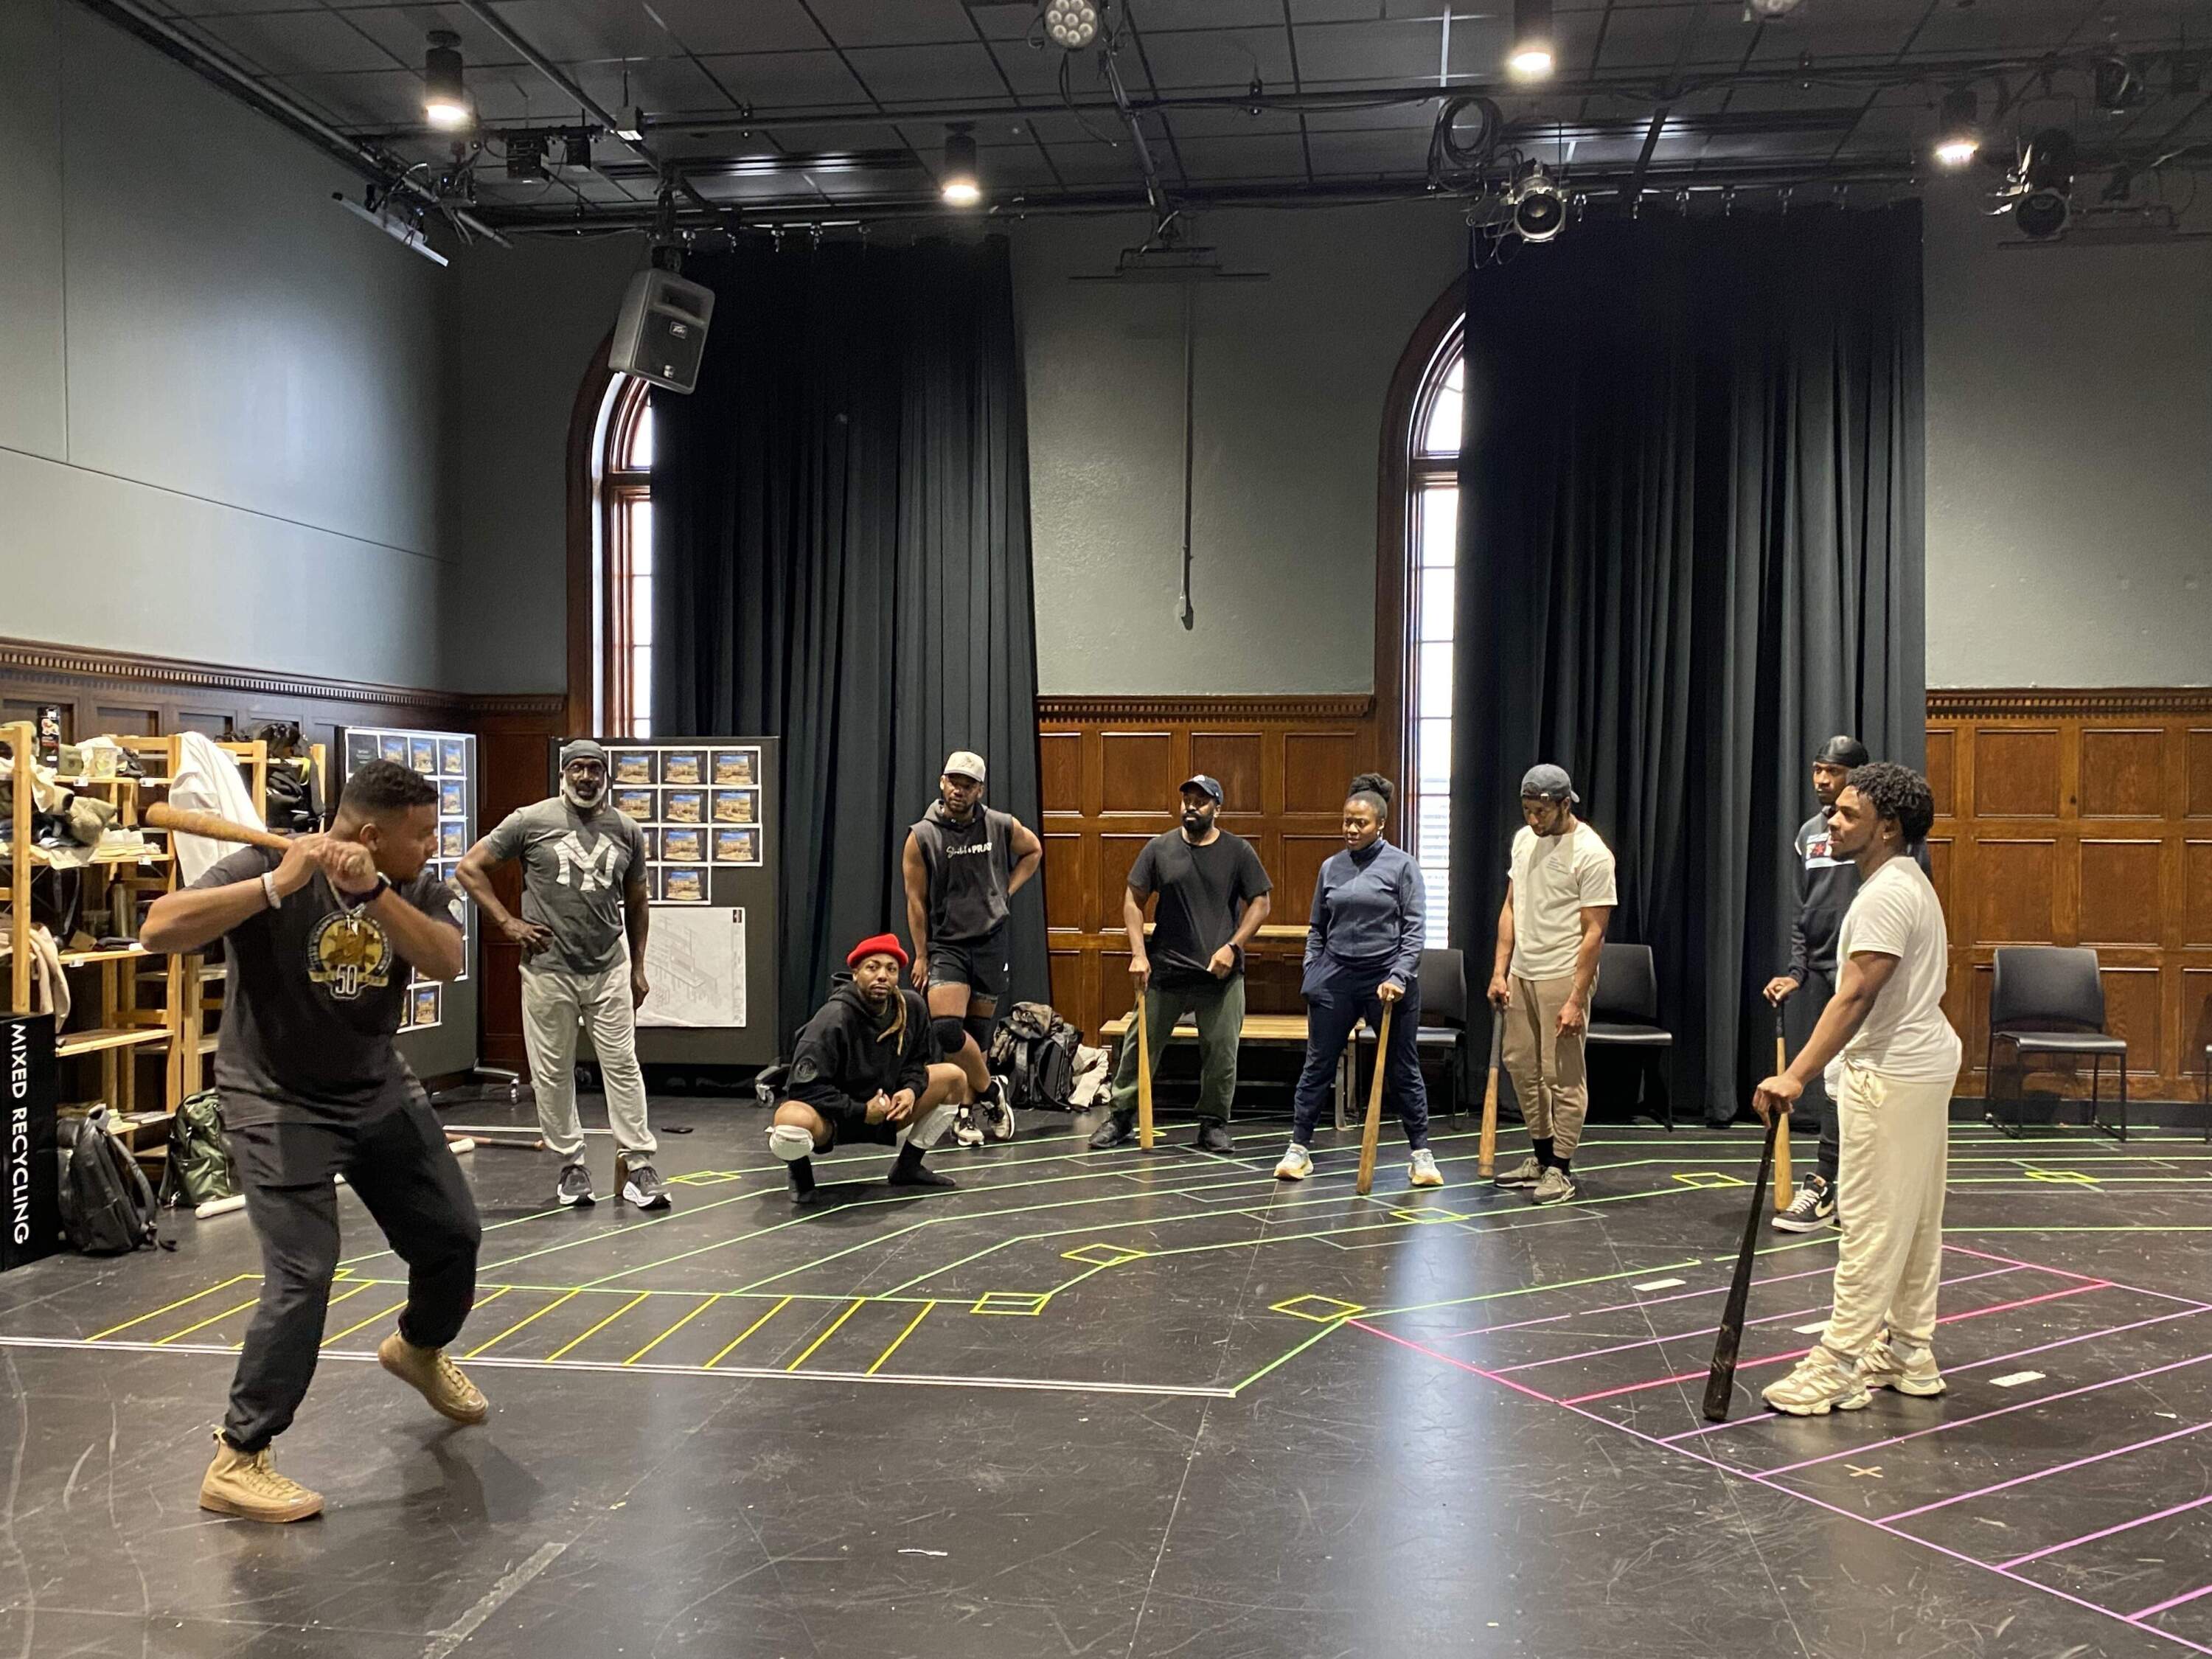 During rehearsals, the cast of "Toni Stone" learns to catch, slide and swing baseball bats like the pros. (Andrea Shea/WBUR)